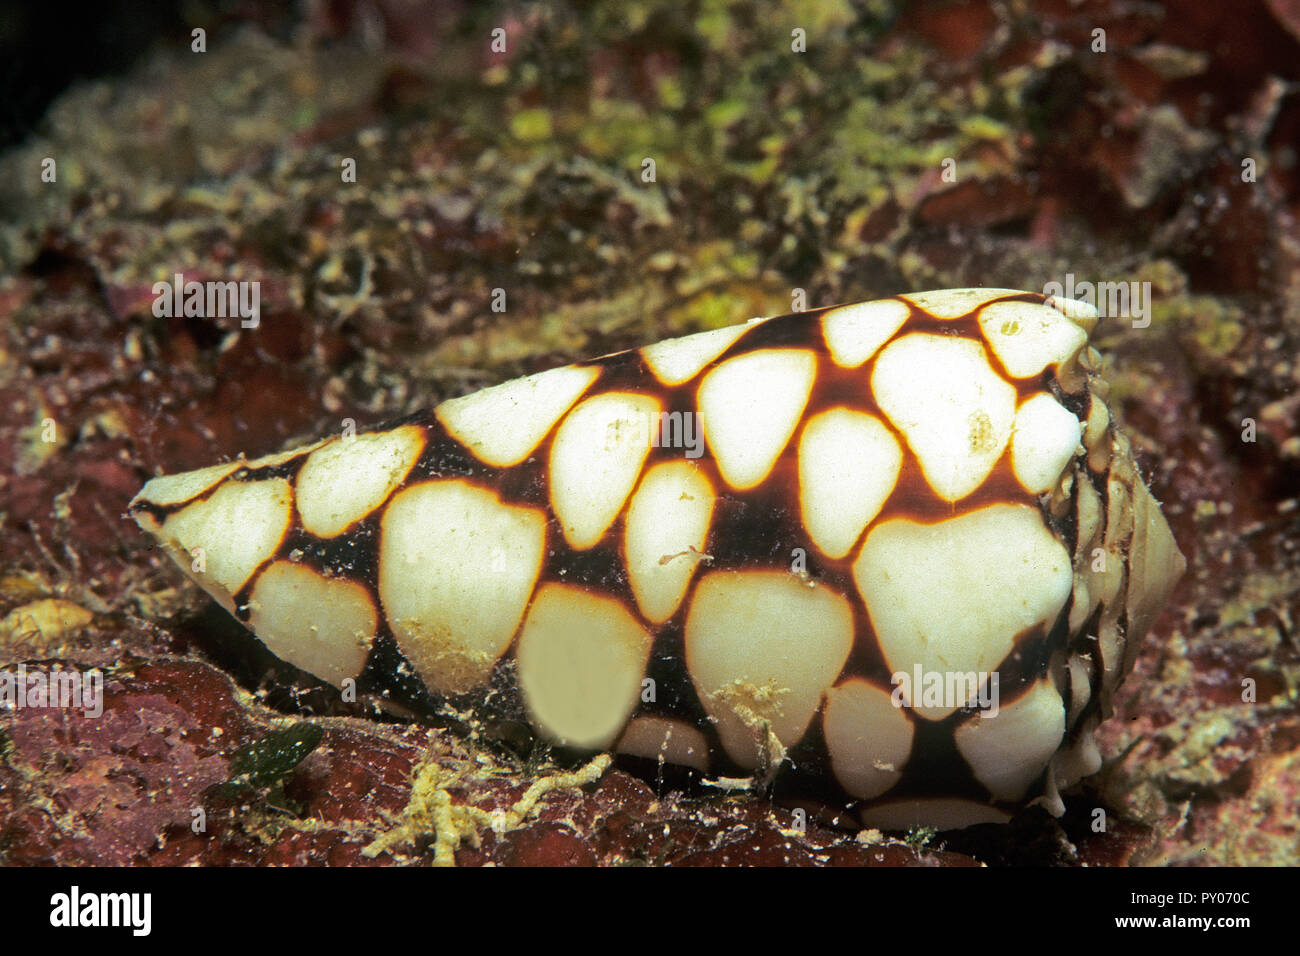 Marbled cone (Conus marmoreus), extremly poisonous, deadly, Great Barrier Reef, Australia Stock Photo